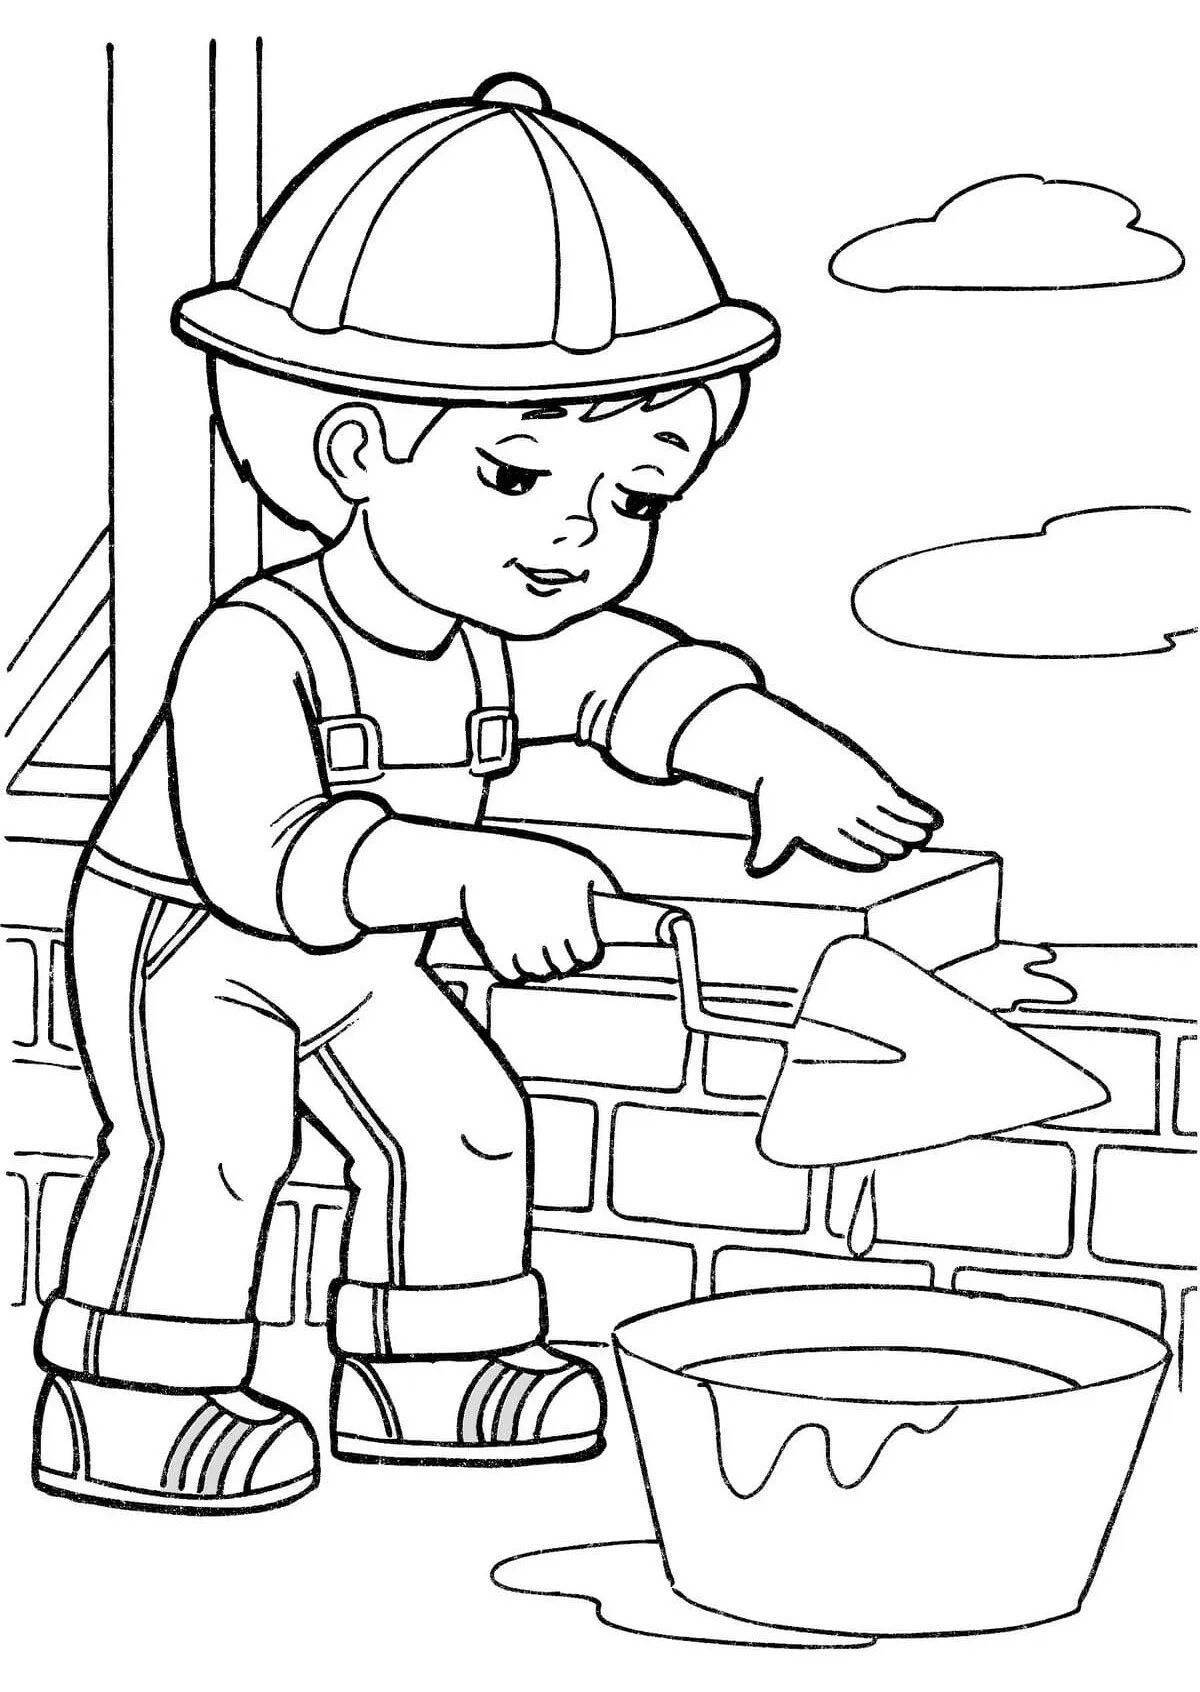 Creative labor protection through the eyes of children for preschoolers